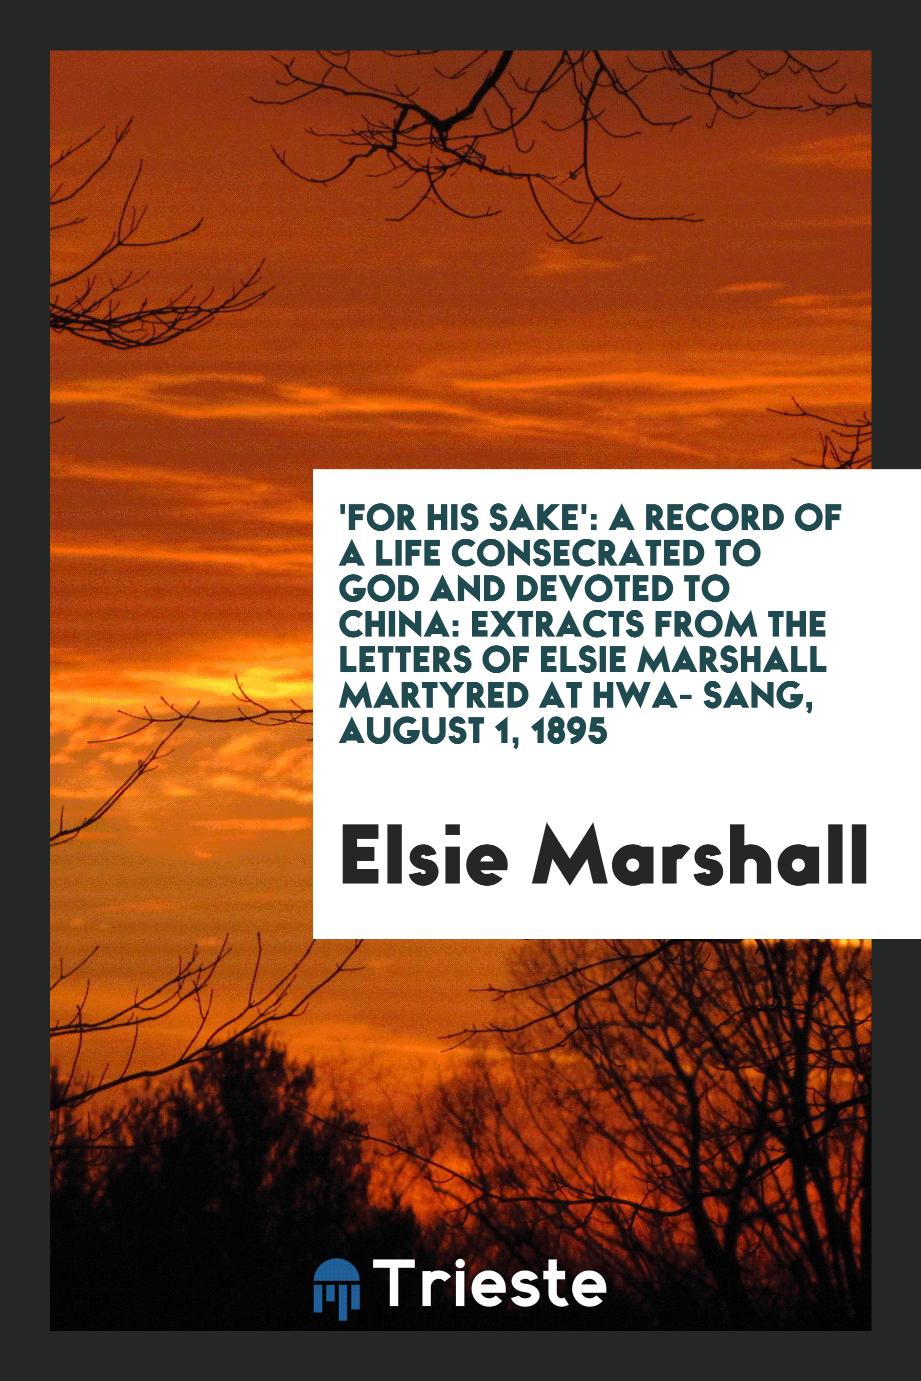 'For His sake': a record of a life consecrated to God and devoted to China: extracts from the letters of Elsie Marshall martyred at Hwa- Sang, August 1, 1895